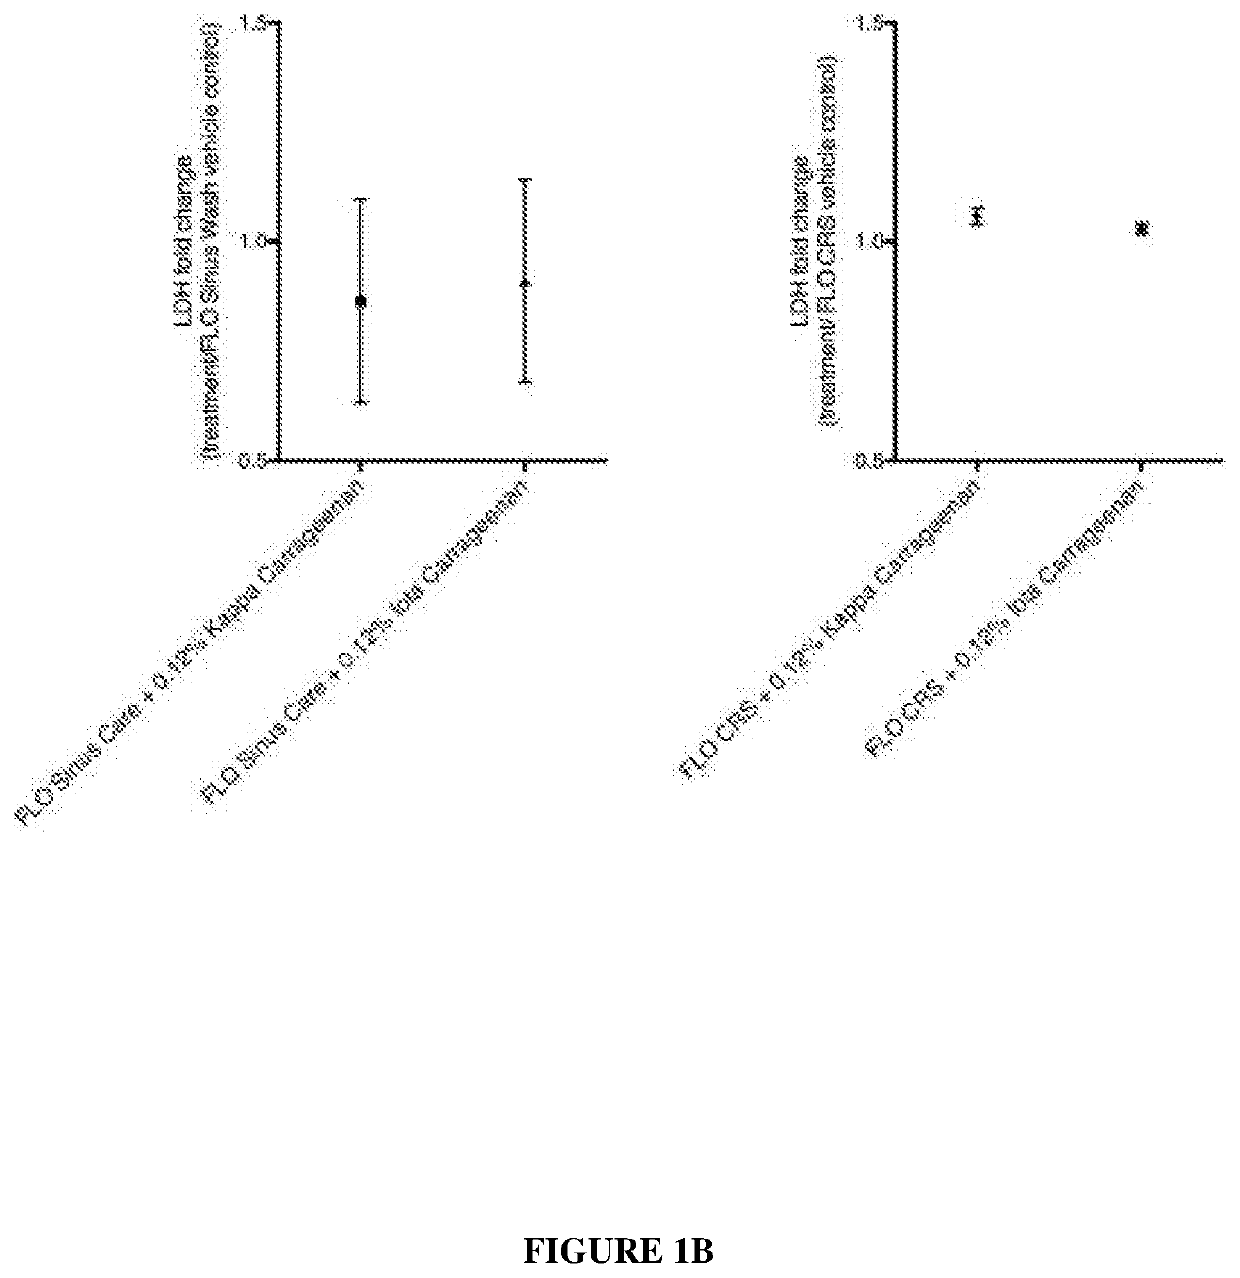 Compositions and methods for the treatment of sinus disease and disorders